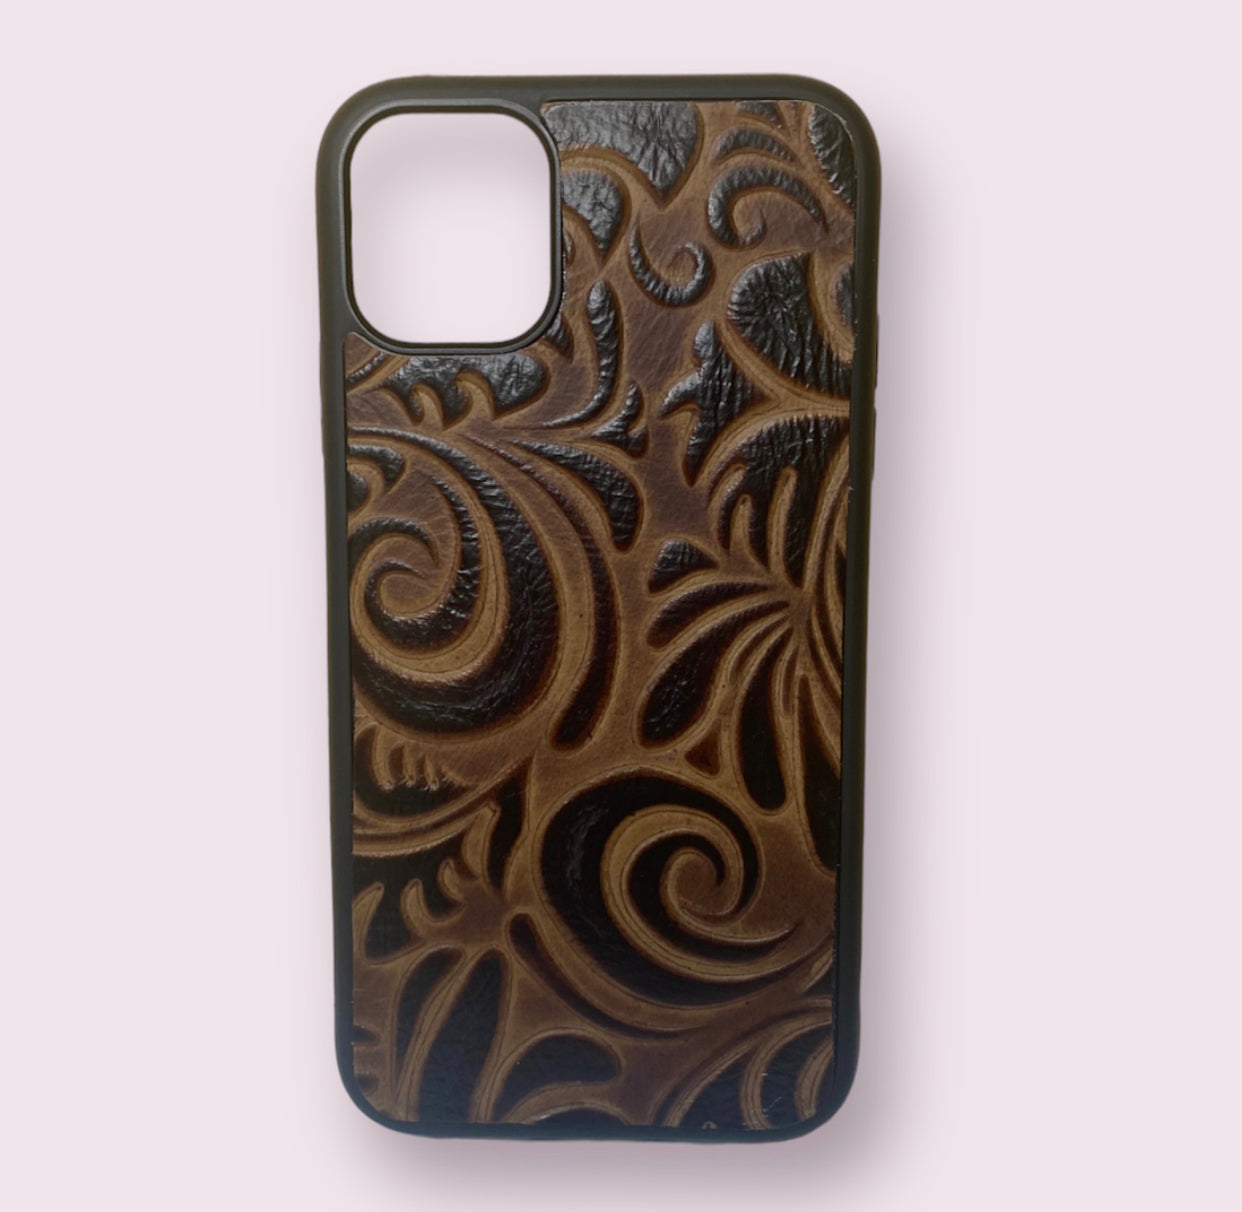 A8350 - IPhone 11 Tooled Leather Case